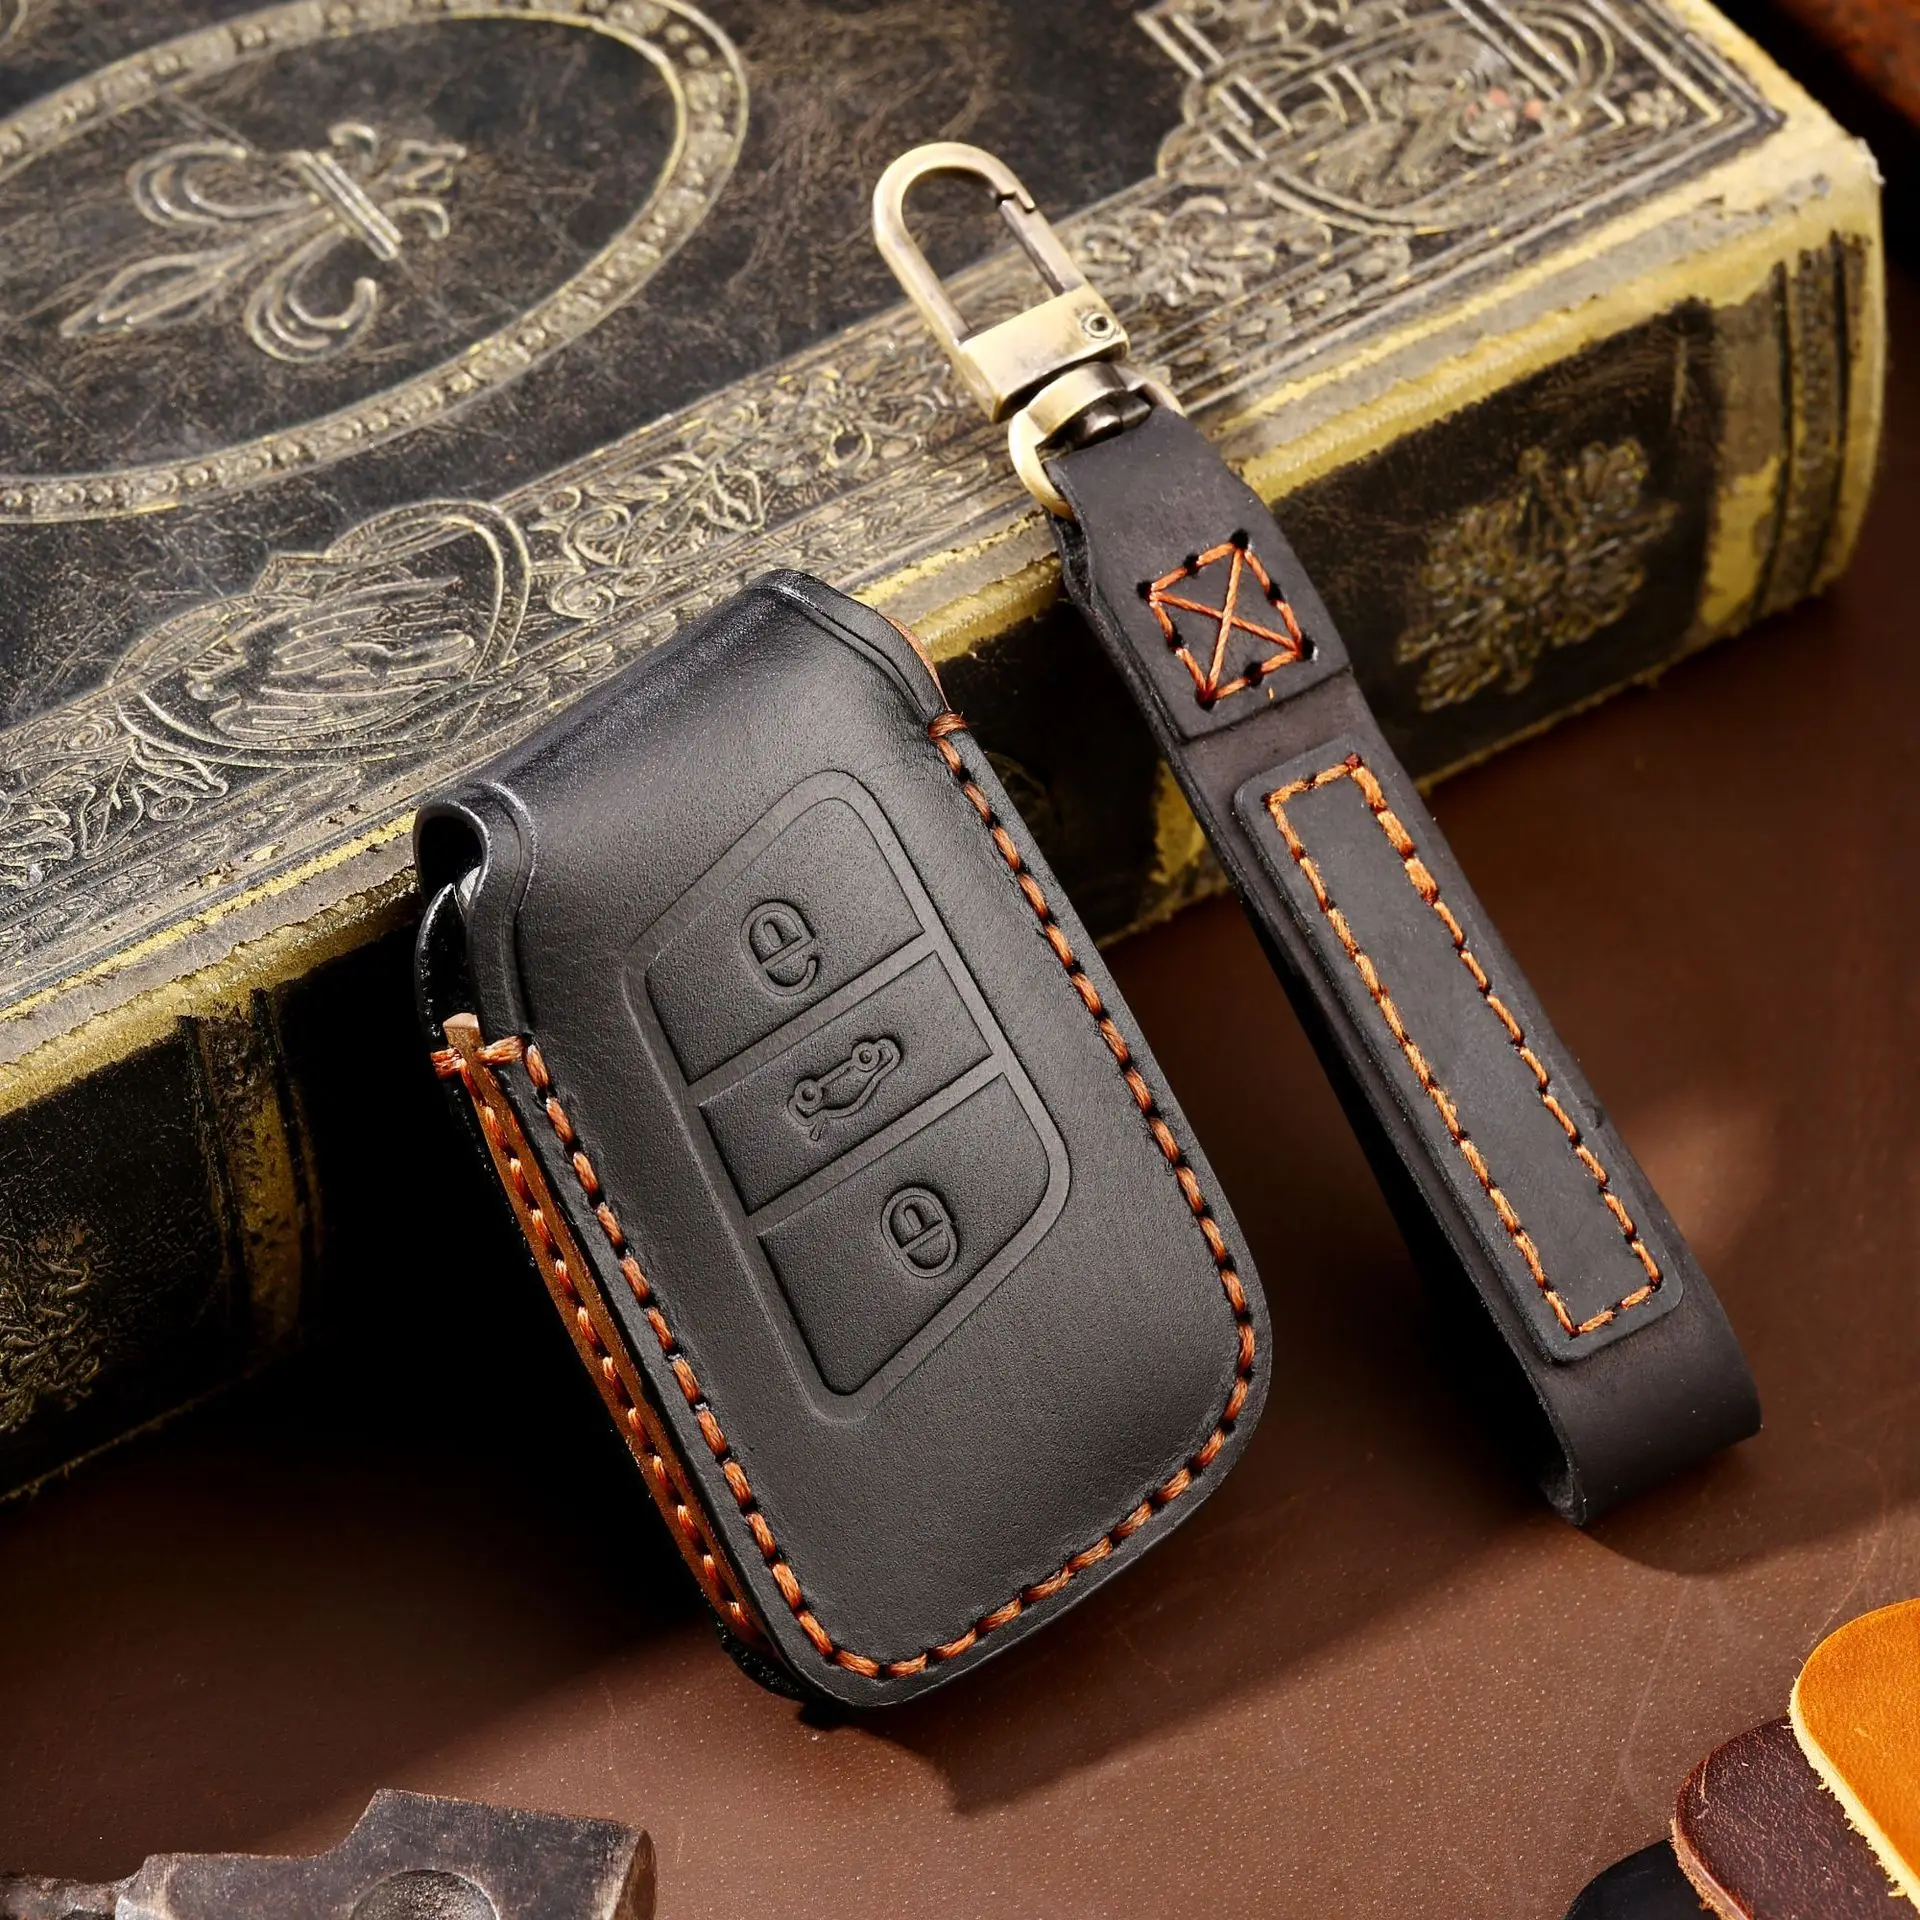 

Luxury Leather Car Key Case Cover Fob Protector Accessories Keychains Holder Keyring for Volkswagen Passat Lavida Tiguan Golf